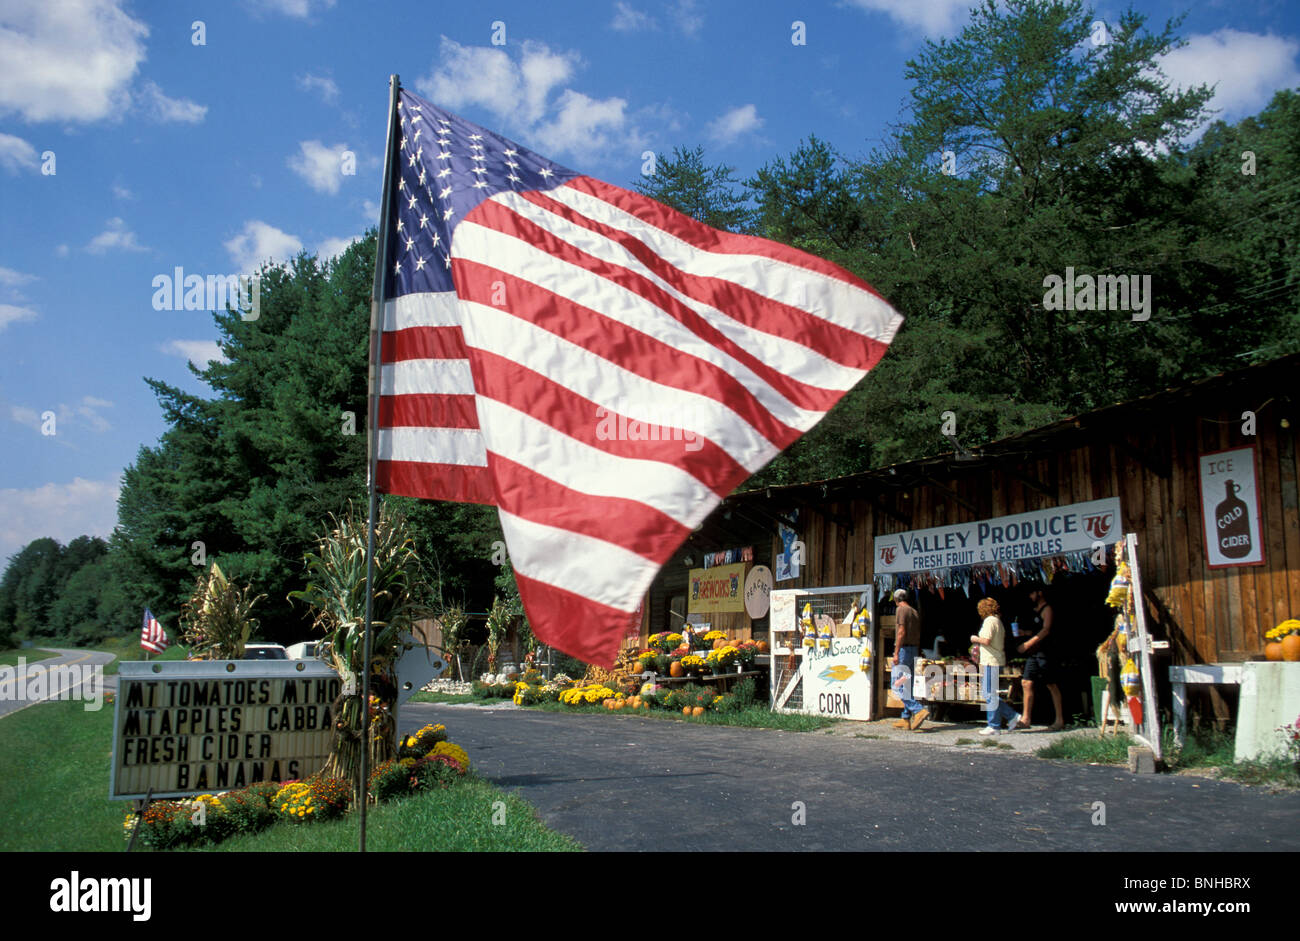 Usa Bryson City North Carolina Country Store Near Bryson City Shop Flag Shopping Vegetables Fruits Rural United States of Stock Photo